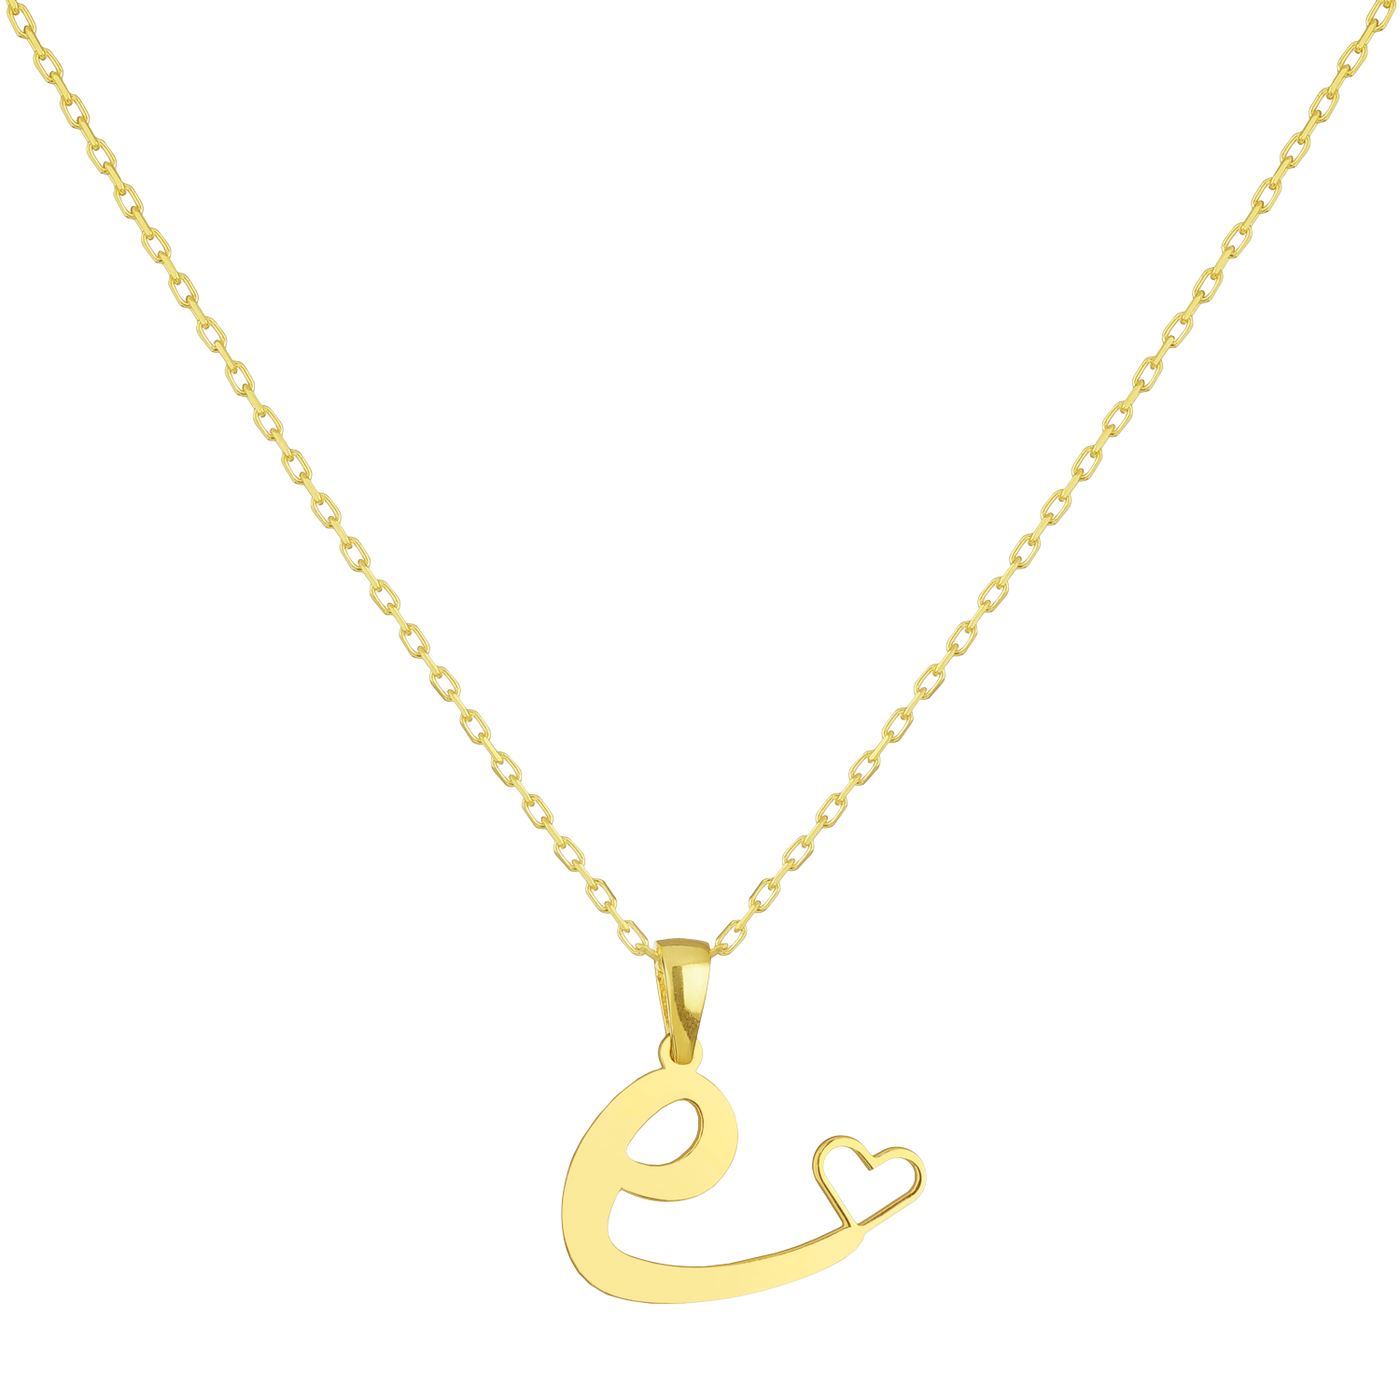 Heart necklace with letter